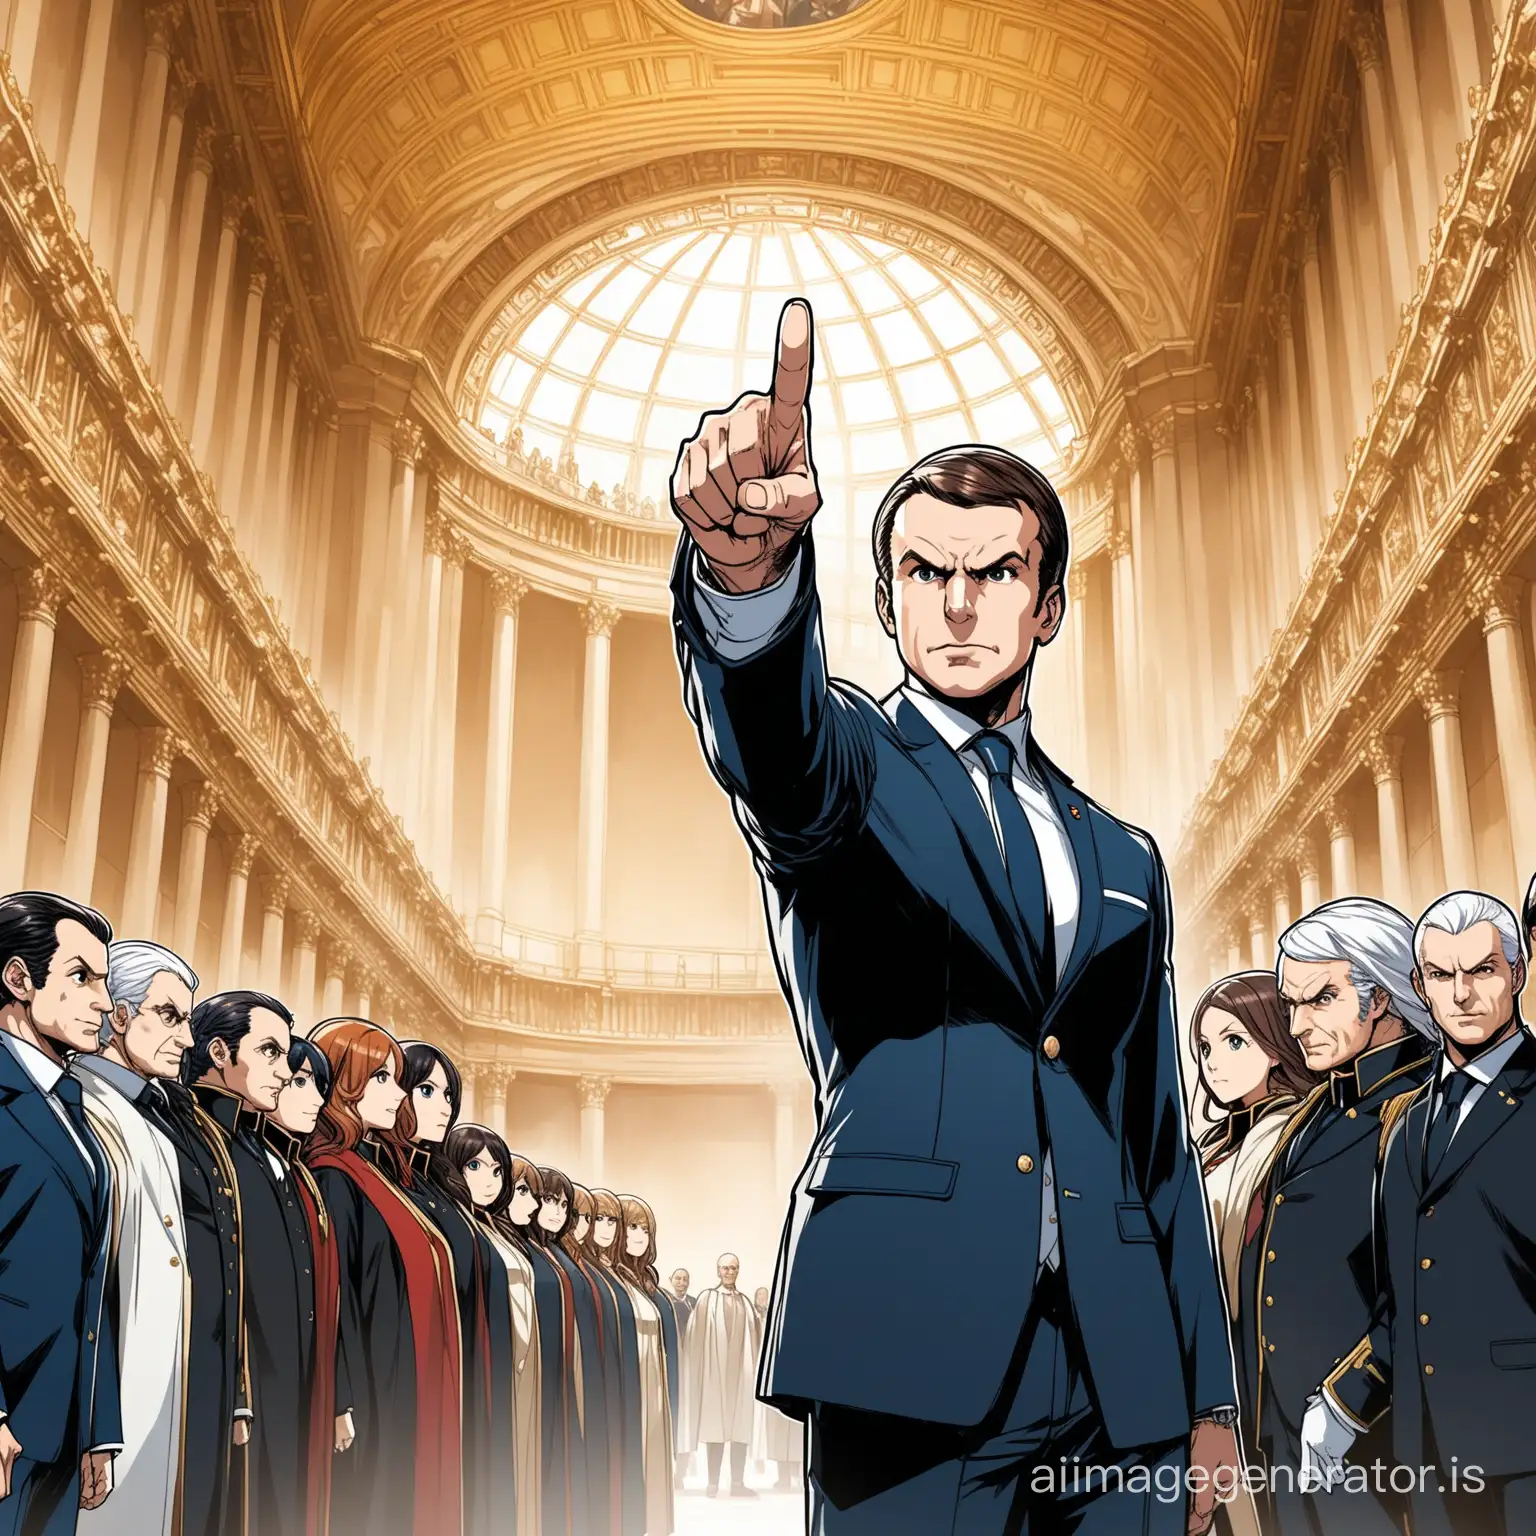 An image of Emmanuel Jean-Michel Frédéric Macron pointing at the opposite side of French museums while being looked by classic French judges. The image should symbolize radical shift, a pivotal moment. Make it in the style of anime